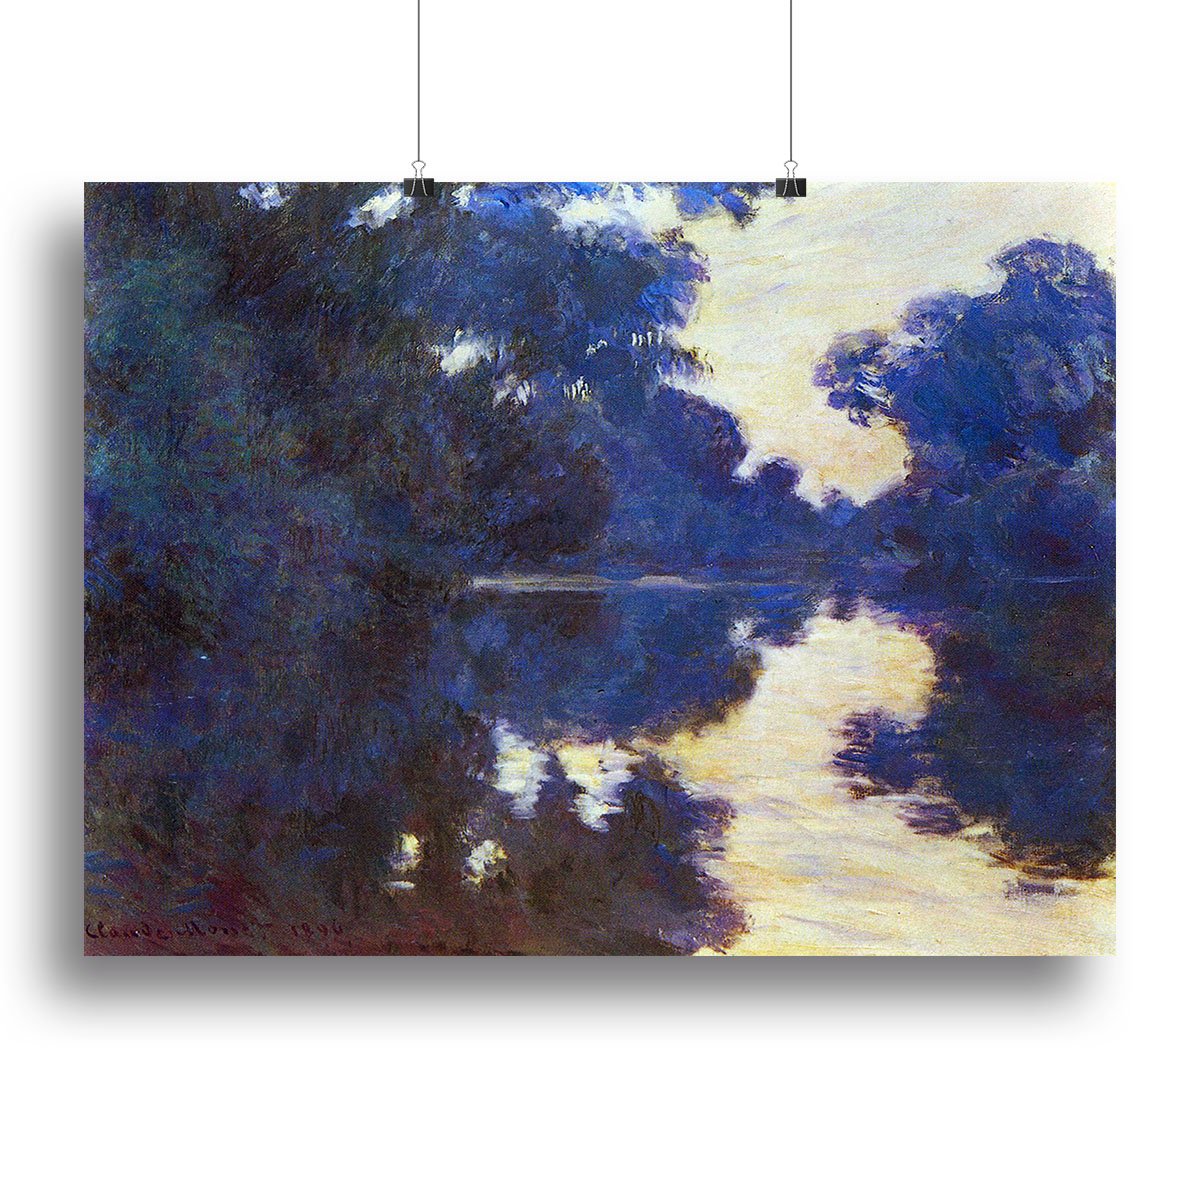 Seine in Morning 2 by Monet Canvas Print or Poster